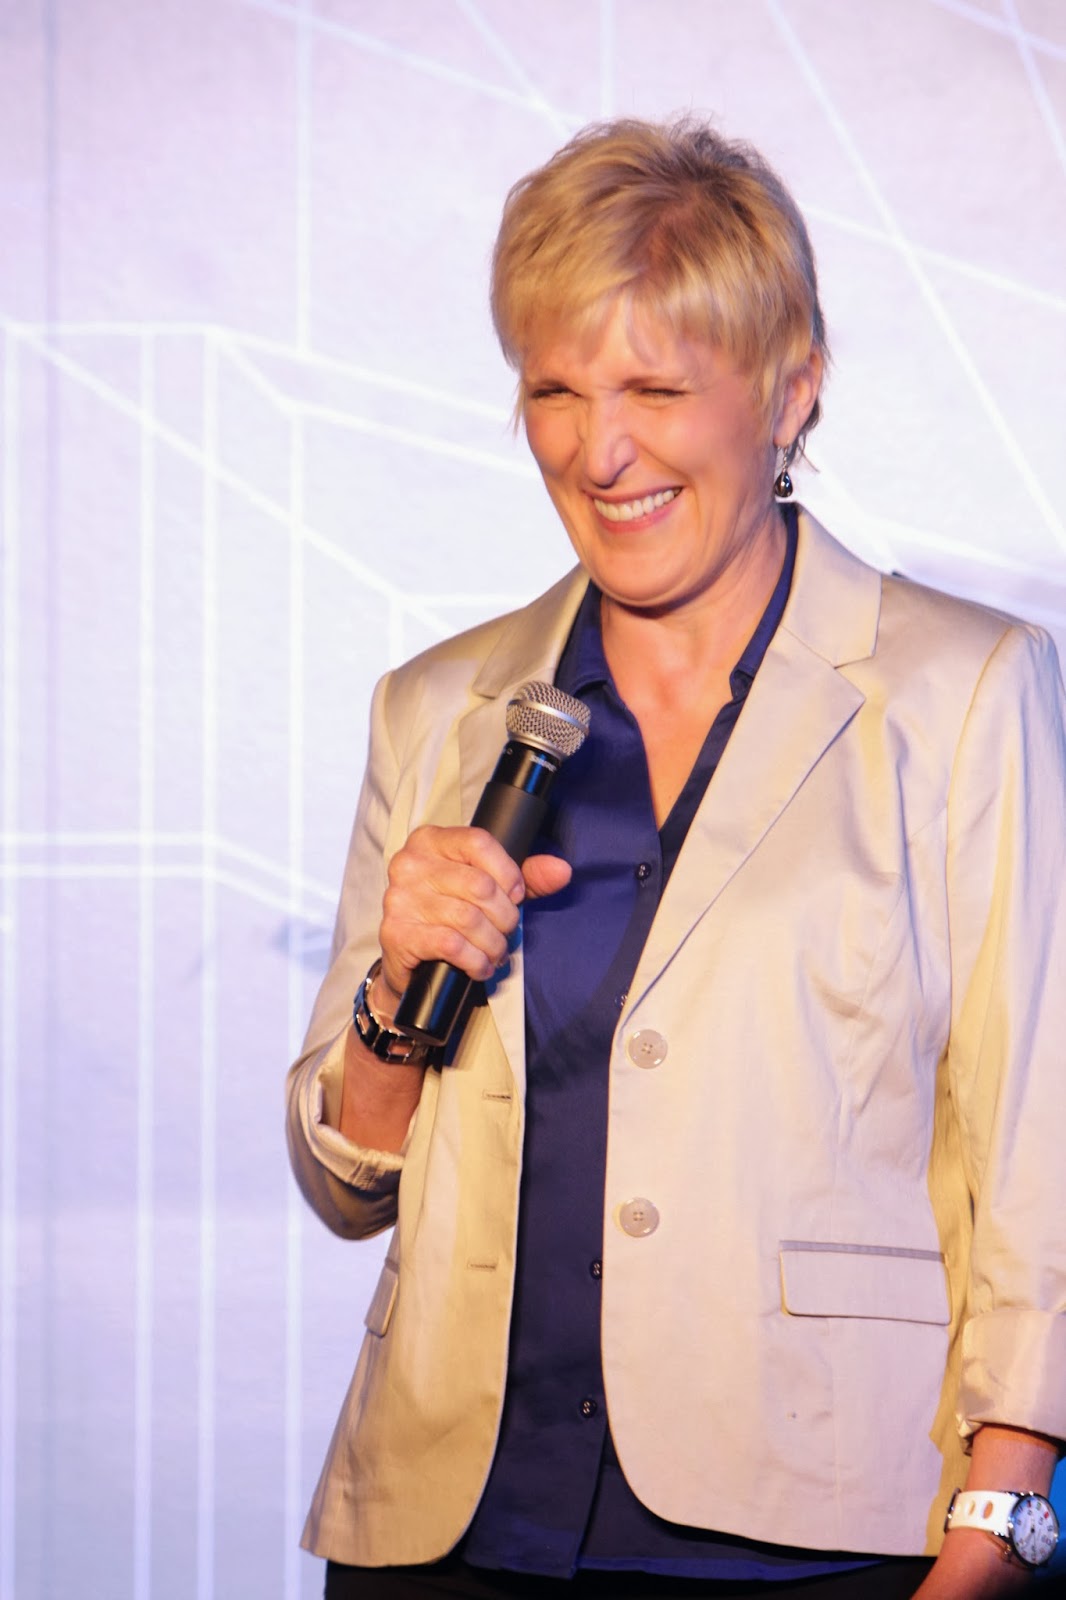  Clean Comedian for Women's Events - Sally Edwards